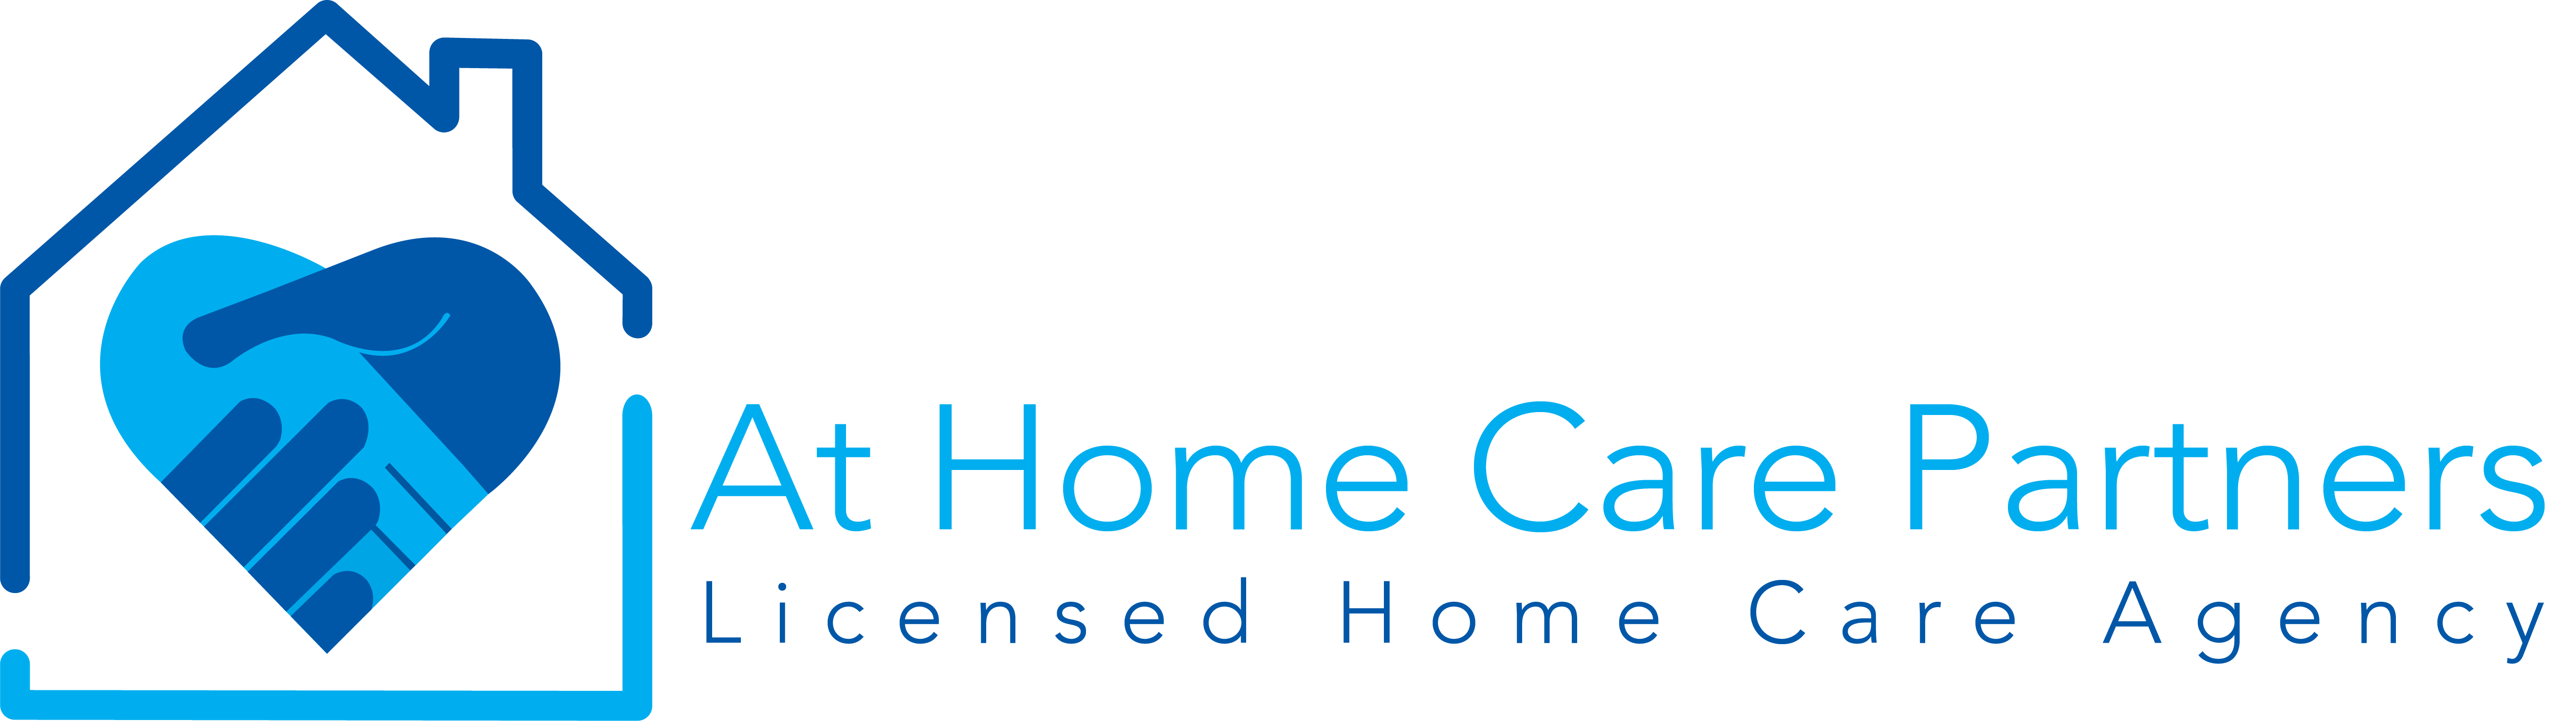 At Home Care Partners